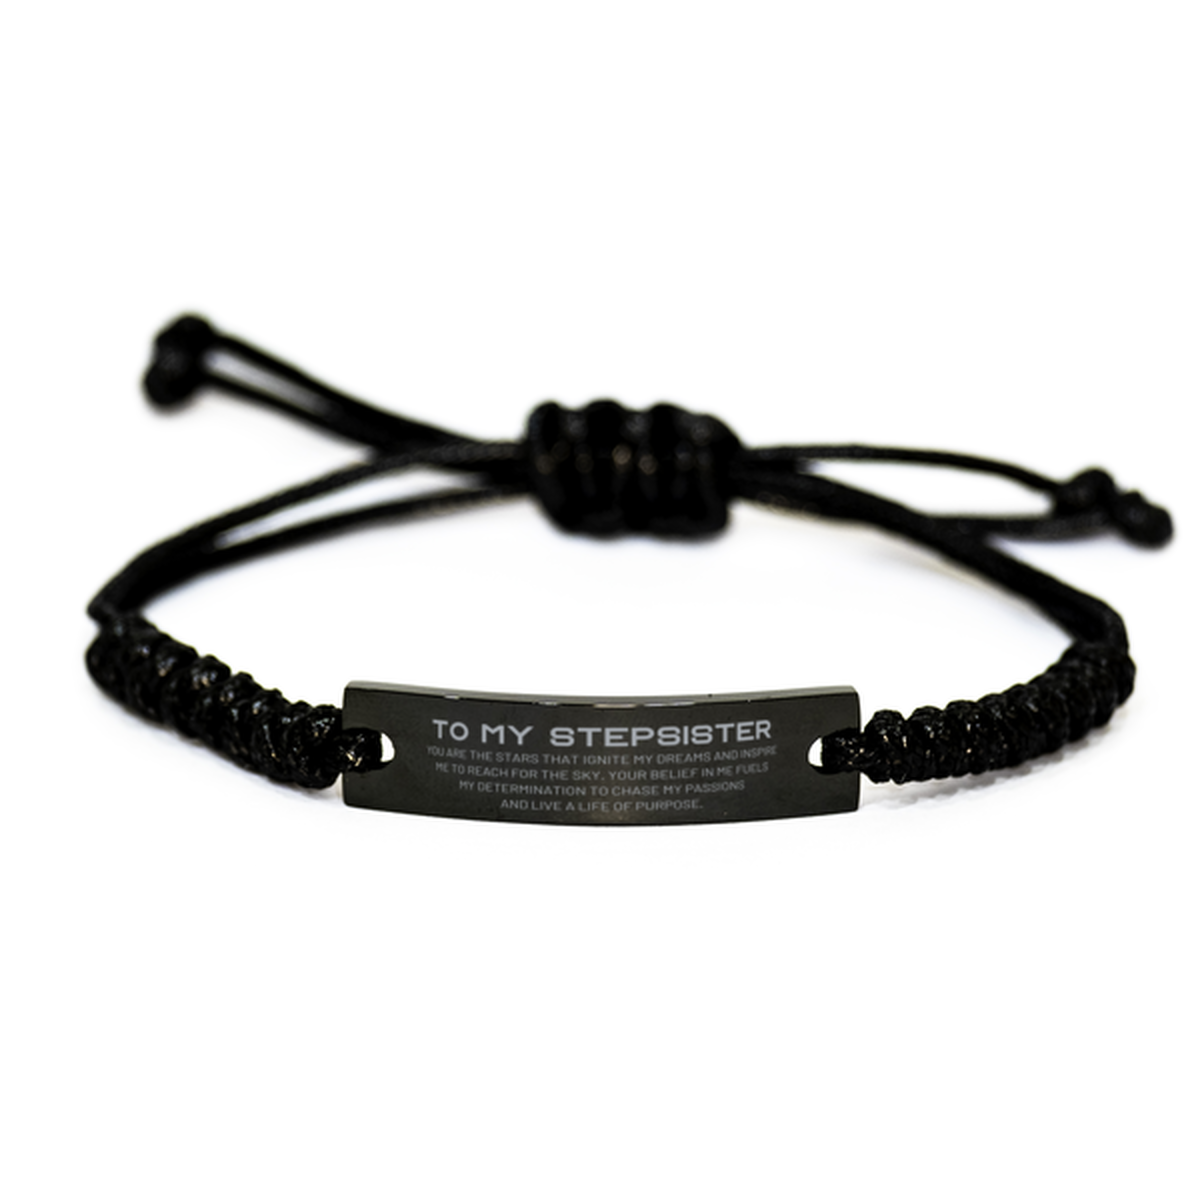 To My Stepsister Black Rope Bracelet, You are the stars that ignite my dreams and inspire me to reach for the sky, Birthday Unique Gifts For Stepsister, Thank You Gifts For Stepsister